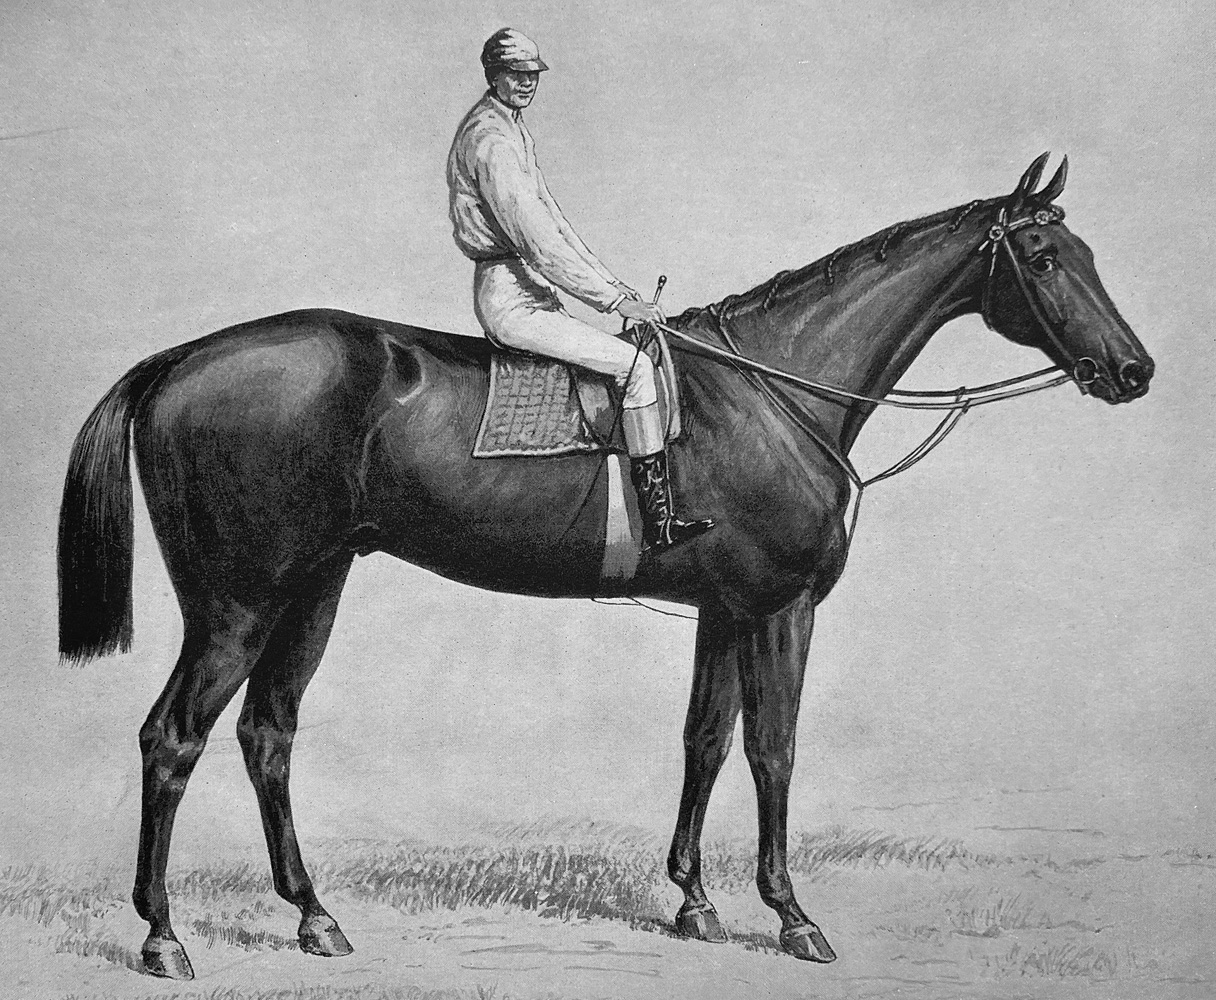 Illustration of Ten Broeck from "Racing in America, 1866-1921" (Museum Collection)